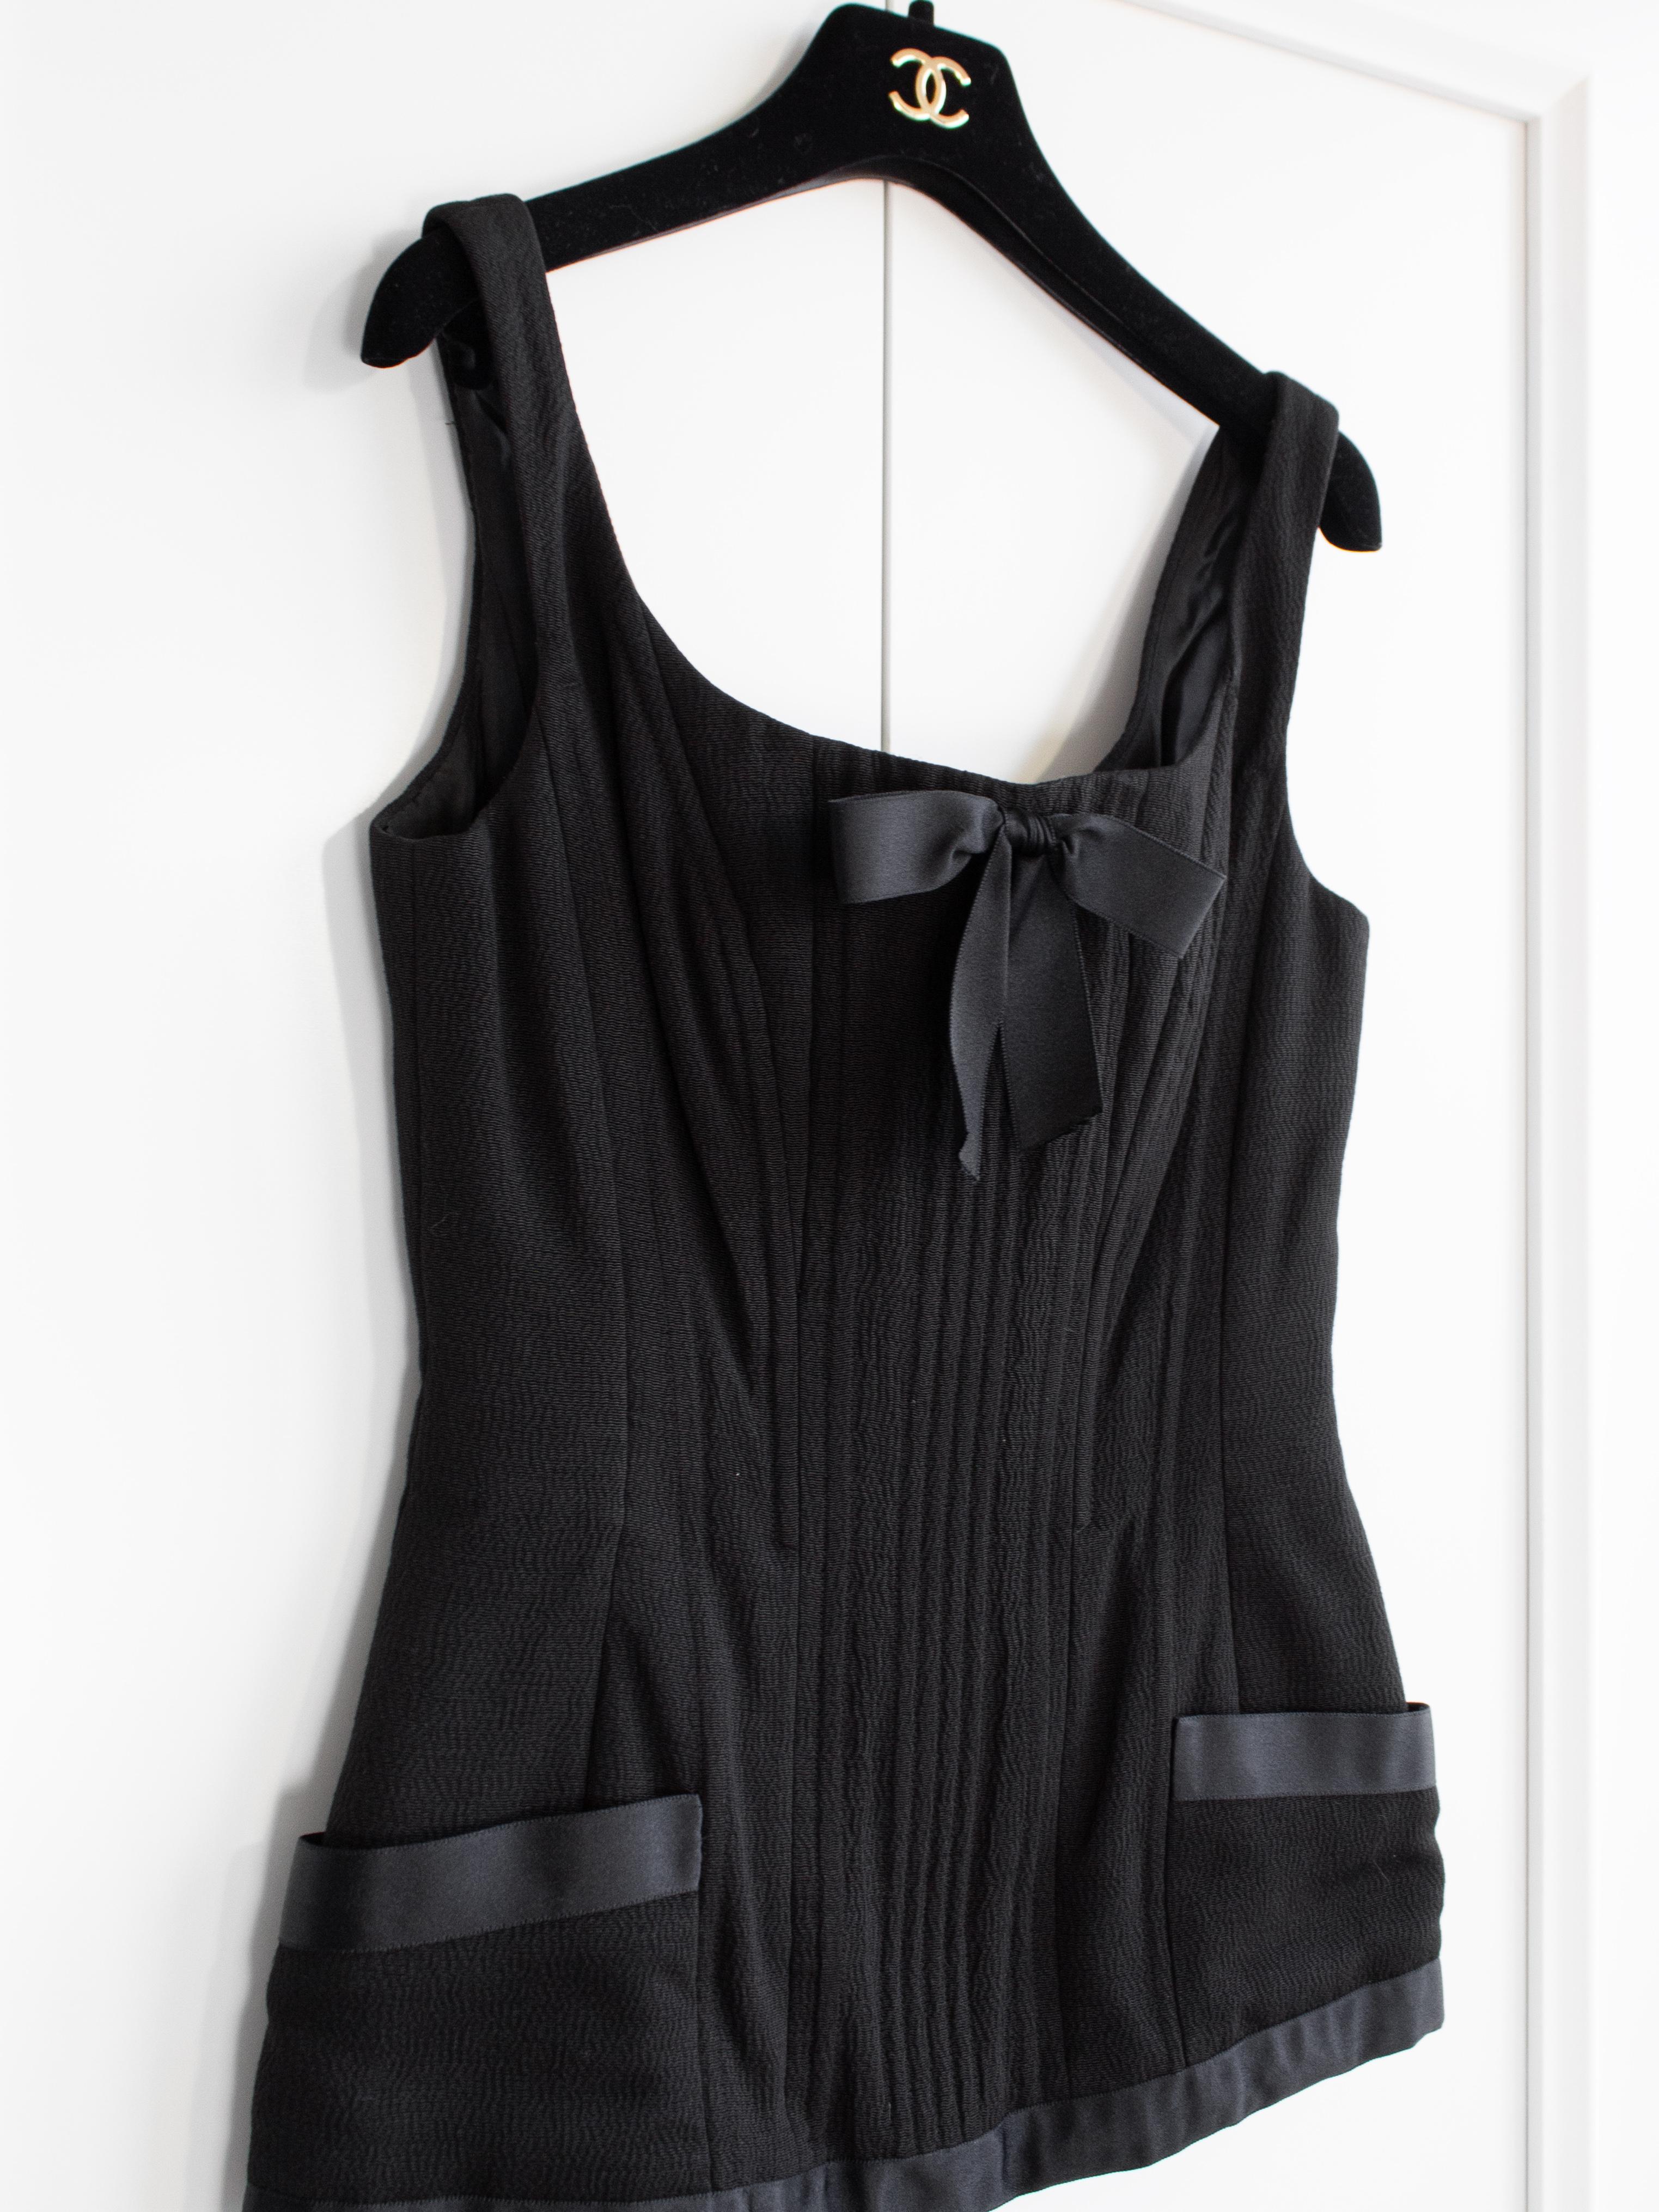 Iconic Chanel Vintage Spring/Summer 1993 Black Silk Bow 93P Corset Top 3